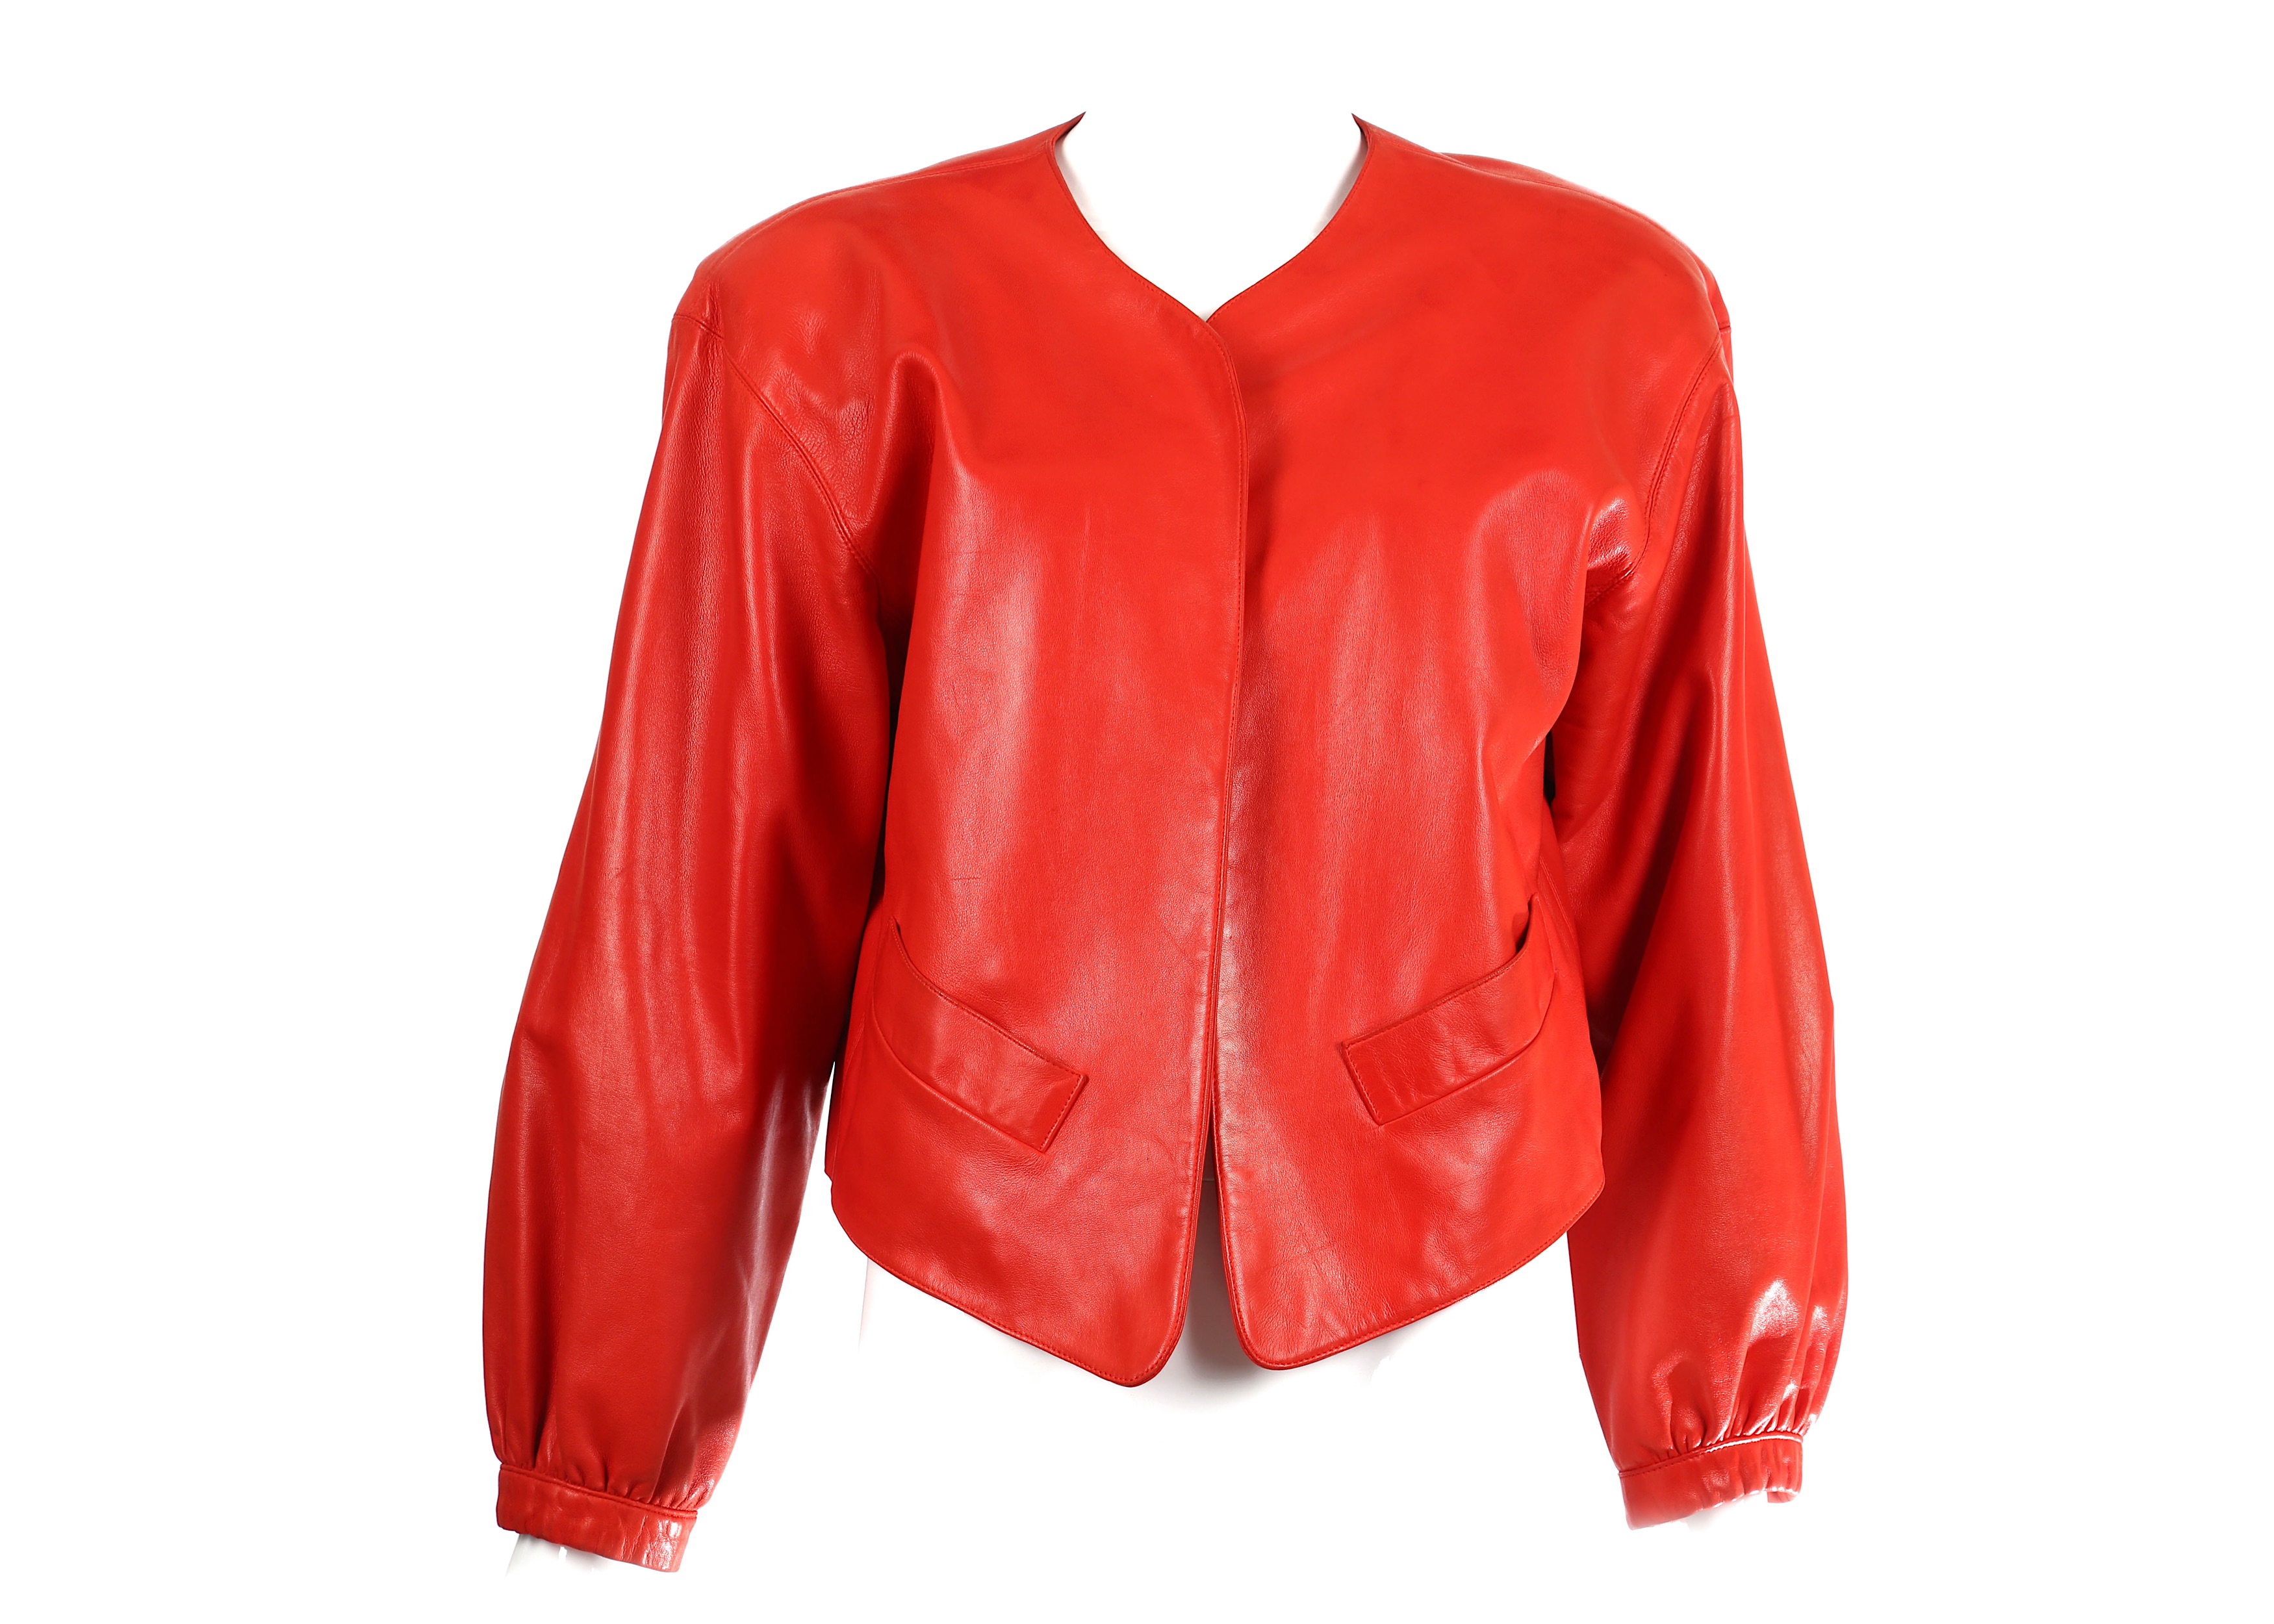 Lot 33 - Yves Saint Laurent Red Leather Jacket - size